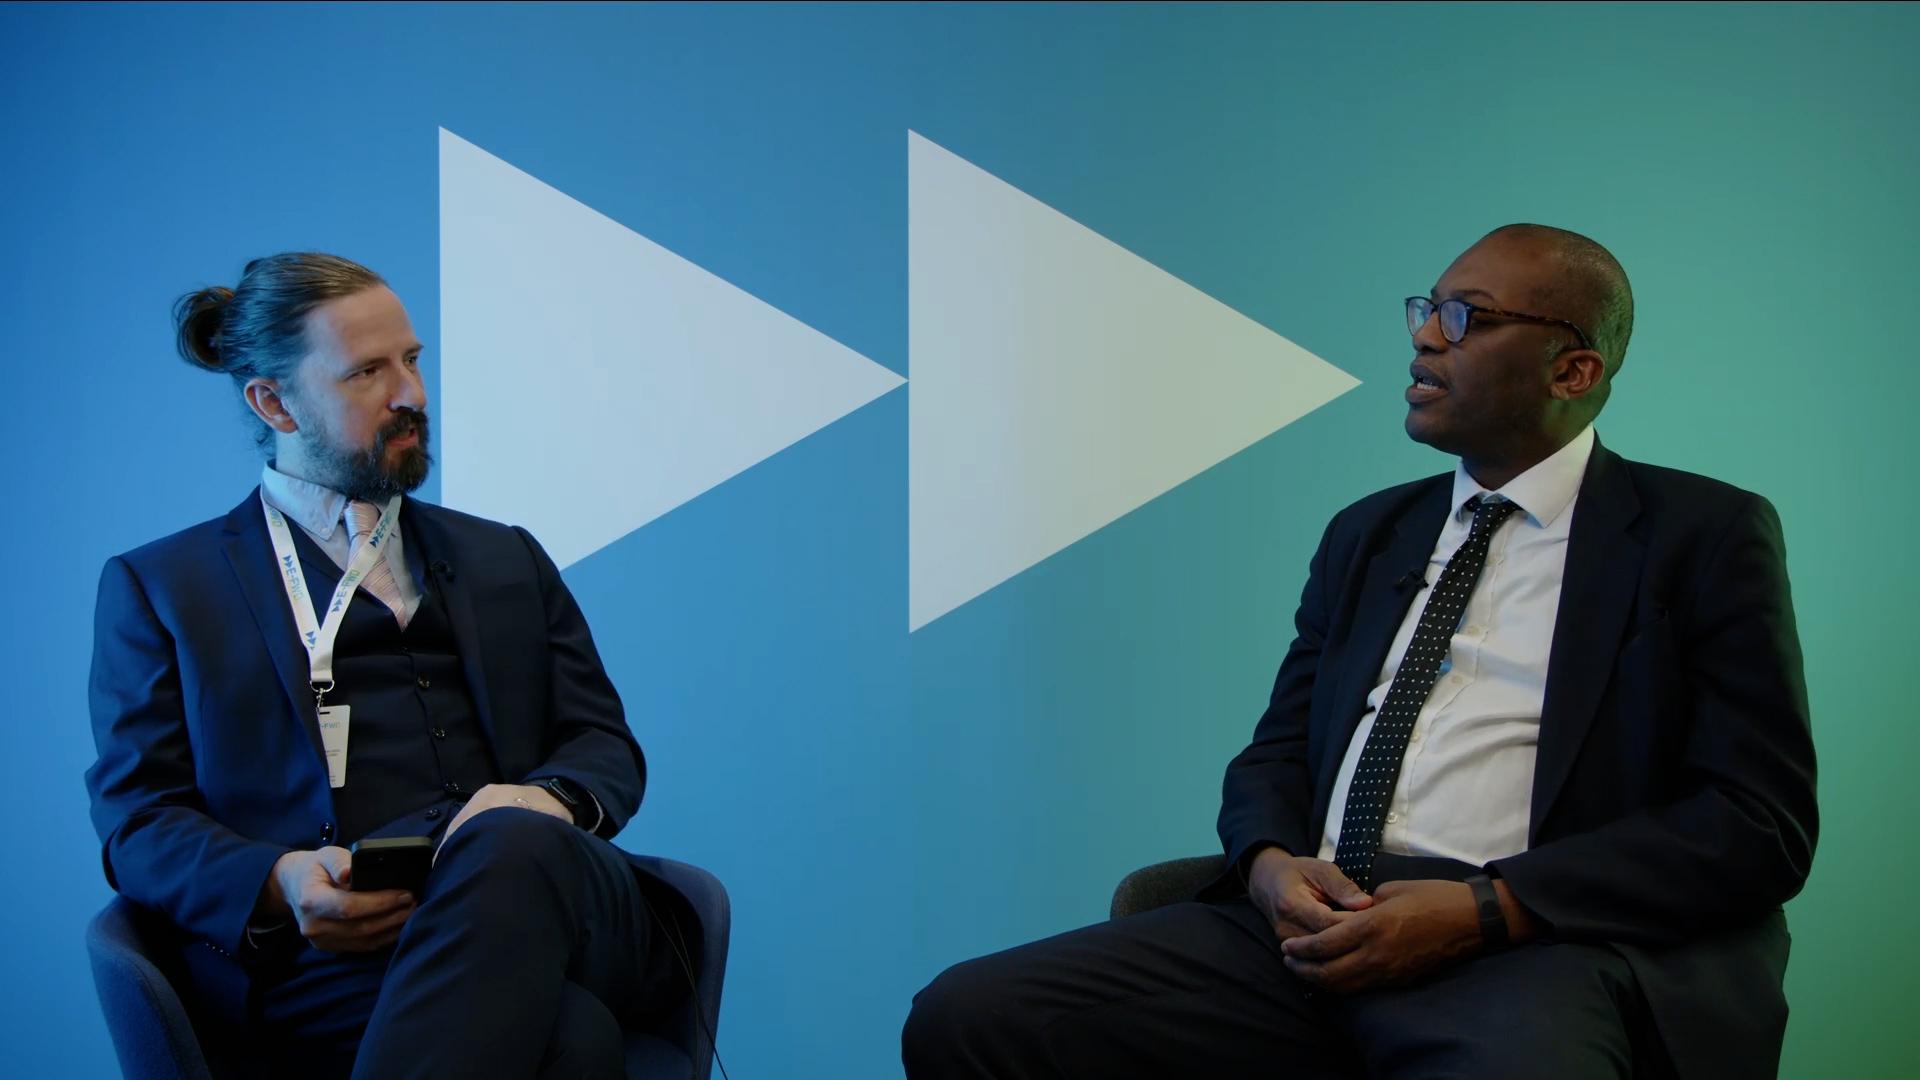 Ed Reed and Kwasi Kwarteng in conversation on the windfall tax